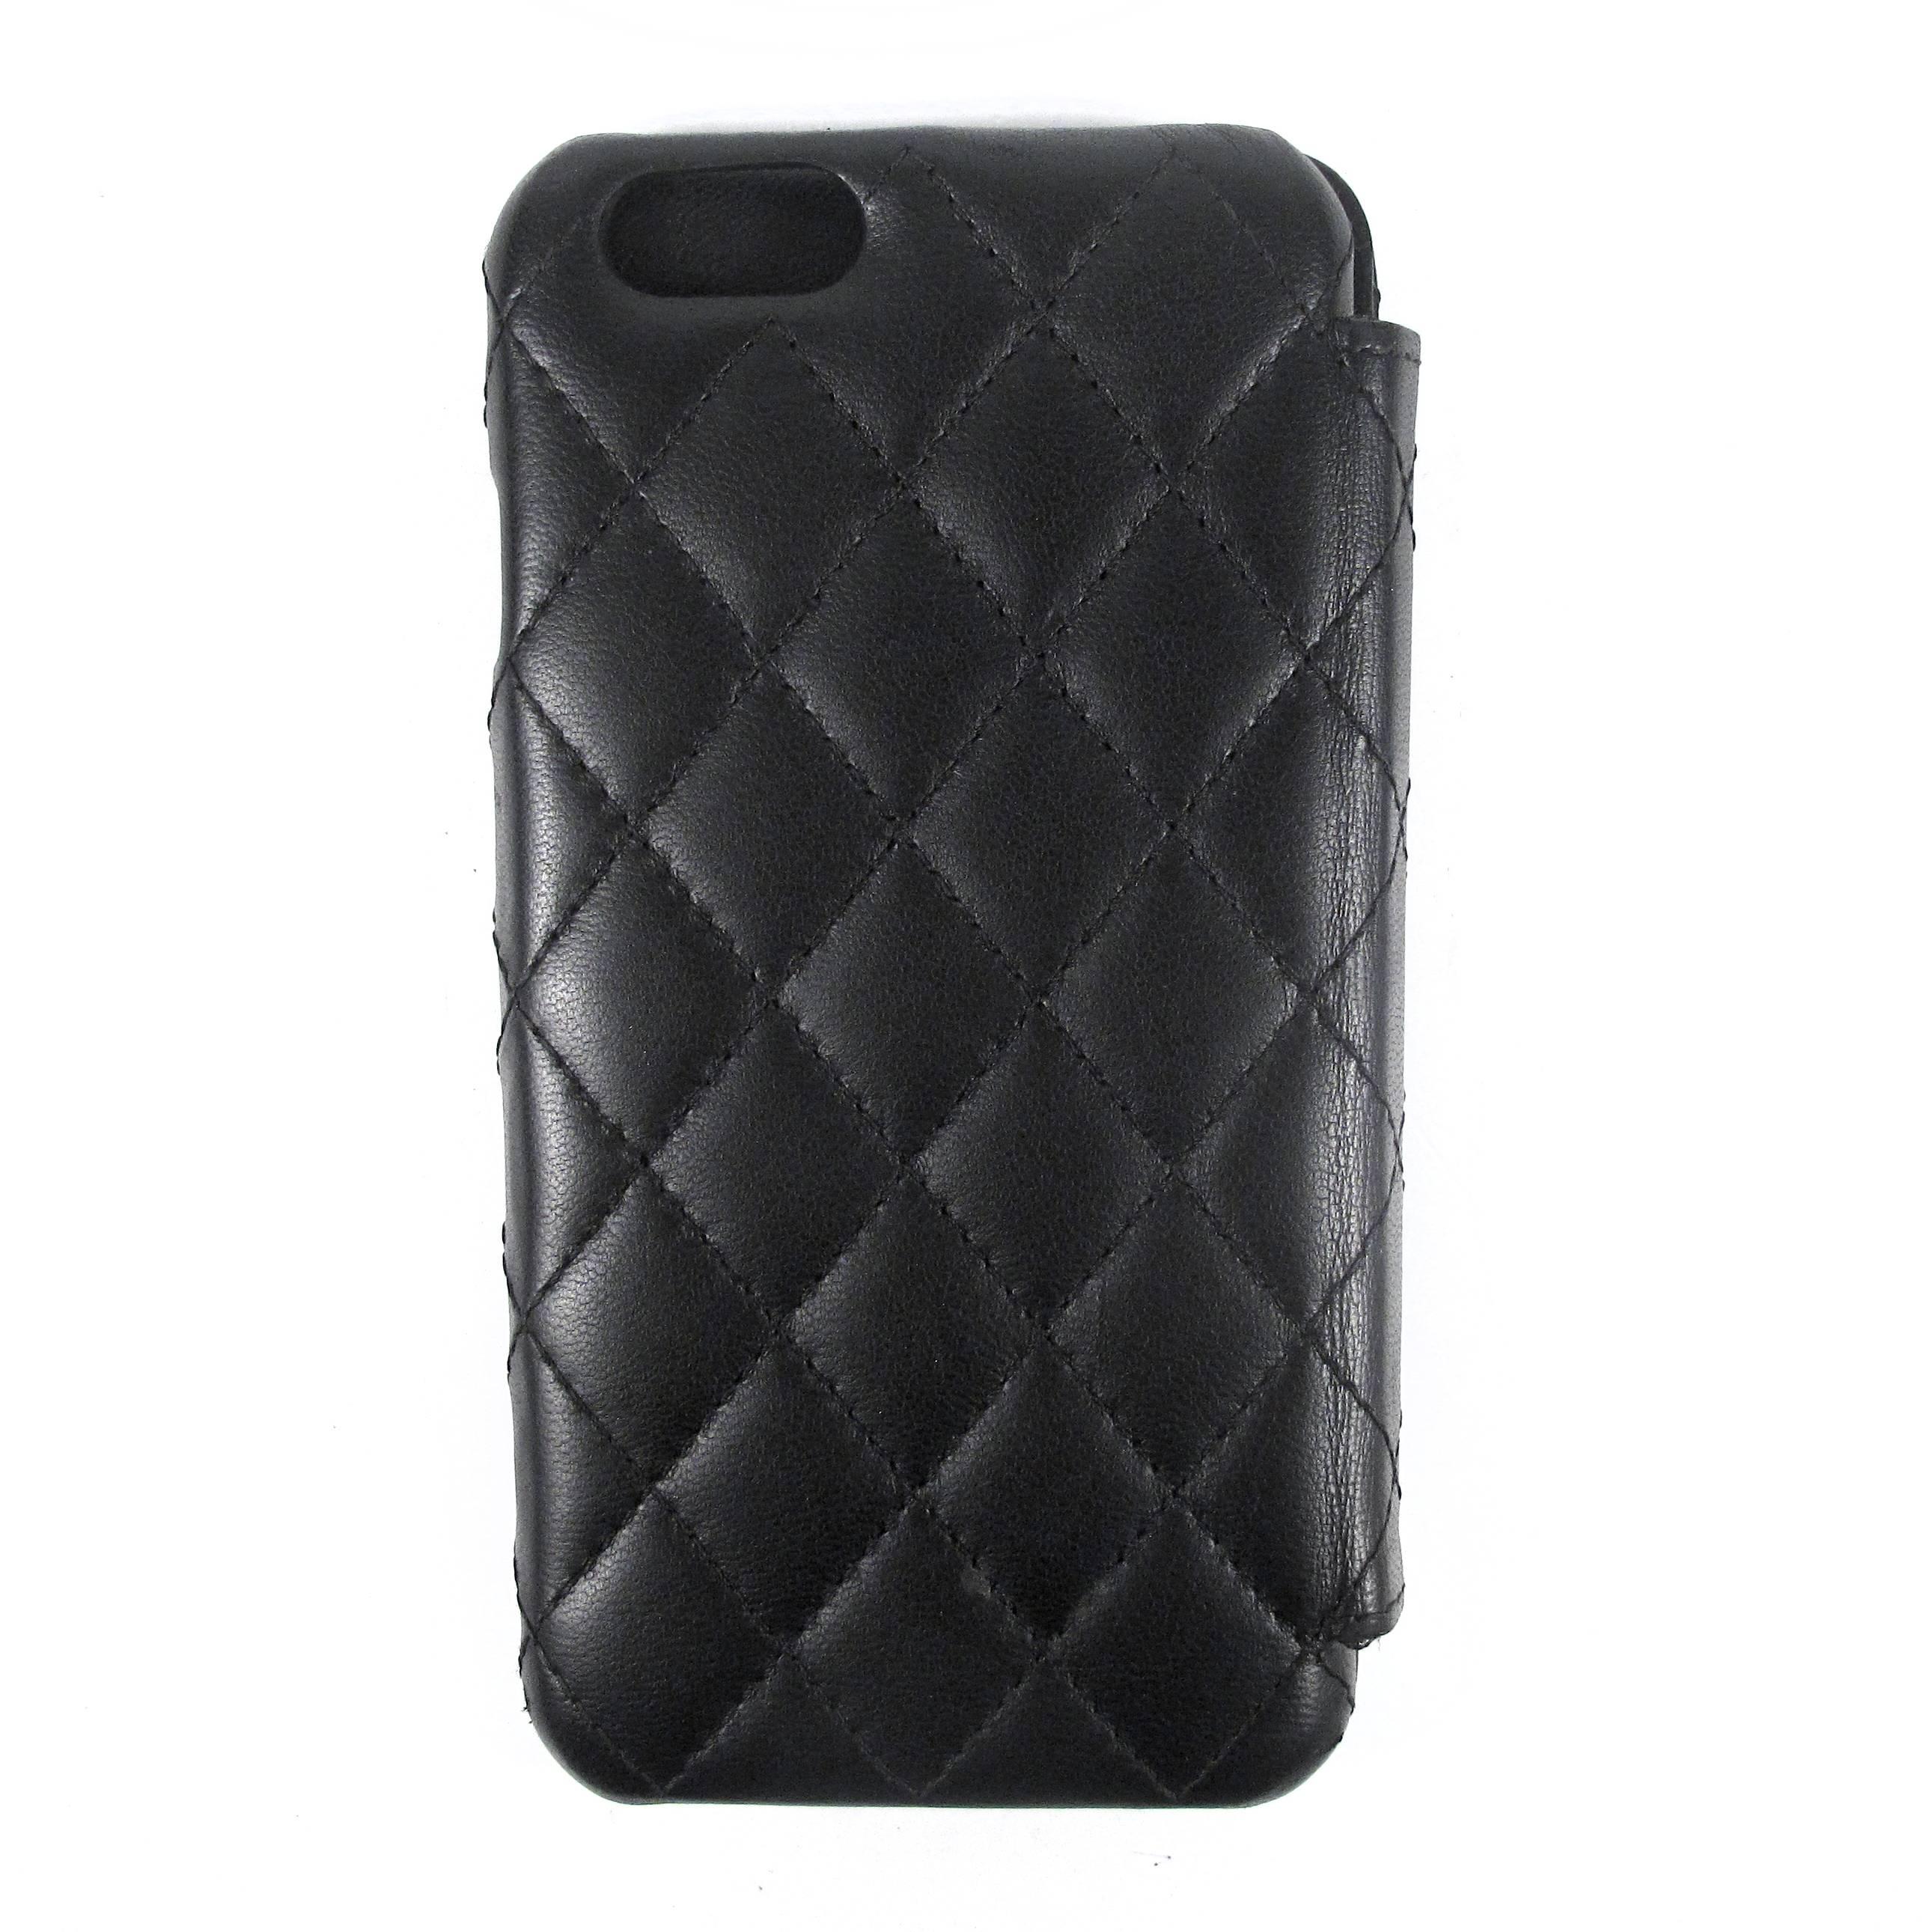 Chanel - Casino iPhone Case

Sold out worldwide instantly - only a few made!

Fits models:  6 , 6s, 7 

(will NOT fit the 6SE , 6s PLUS, or 7 PLUS model)

Color: Black

Material: